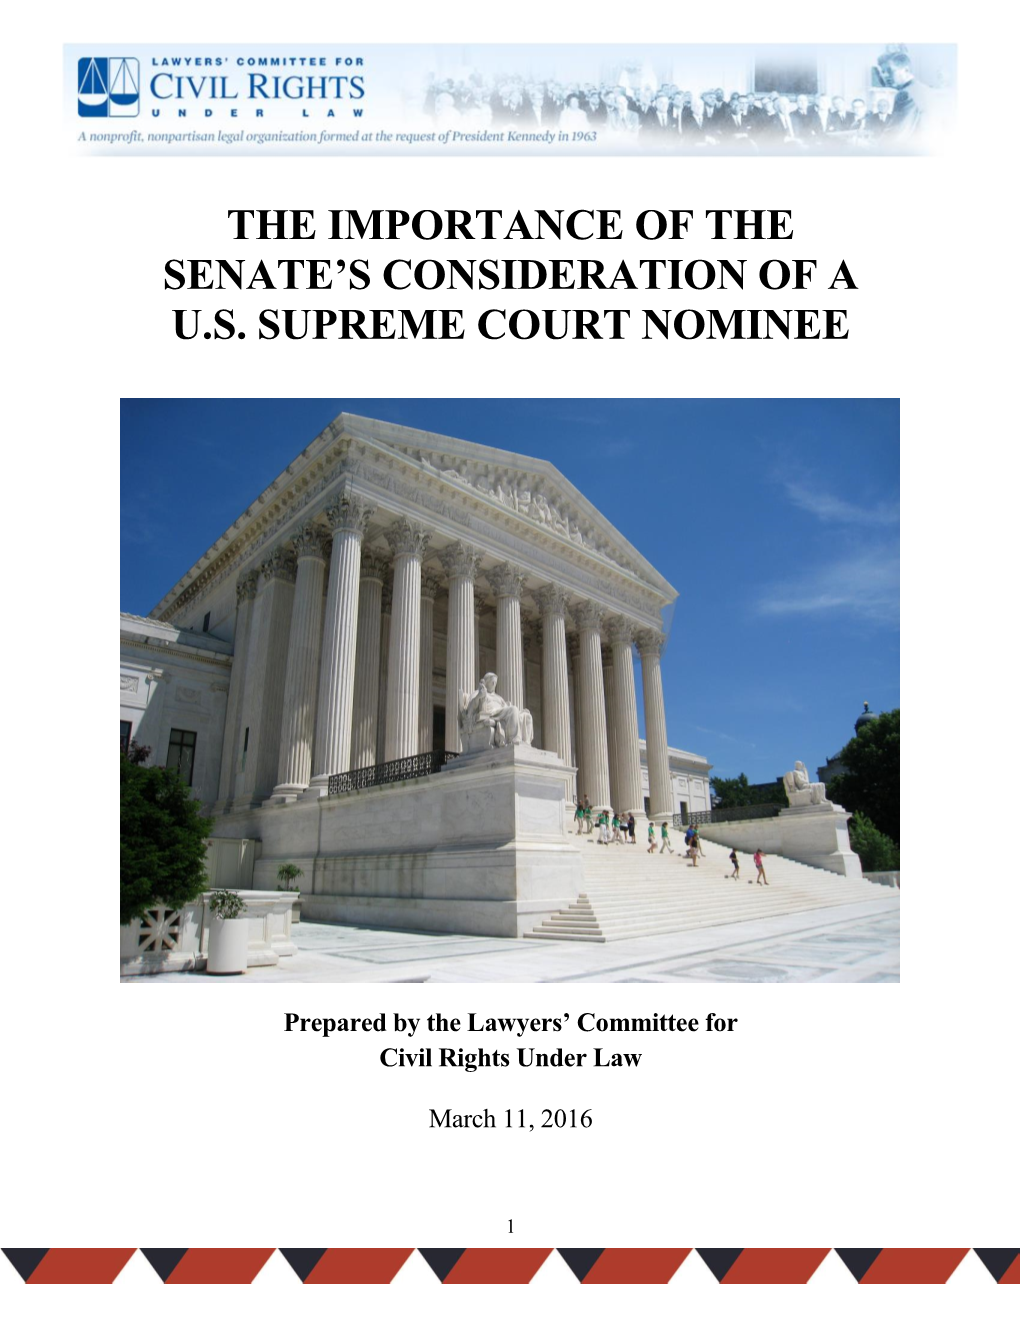 The Importance of the Senate's Consideration of a U.S. Supreme Court Nominee